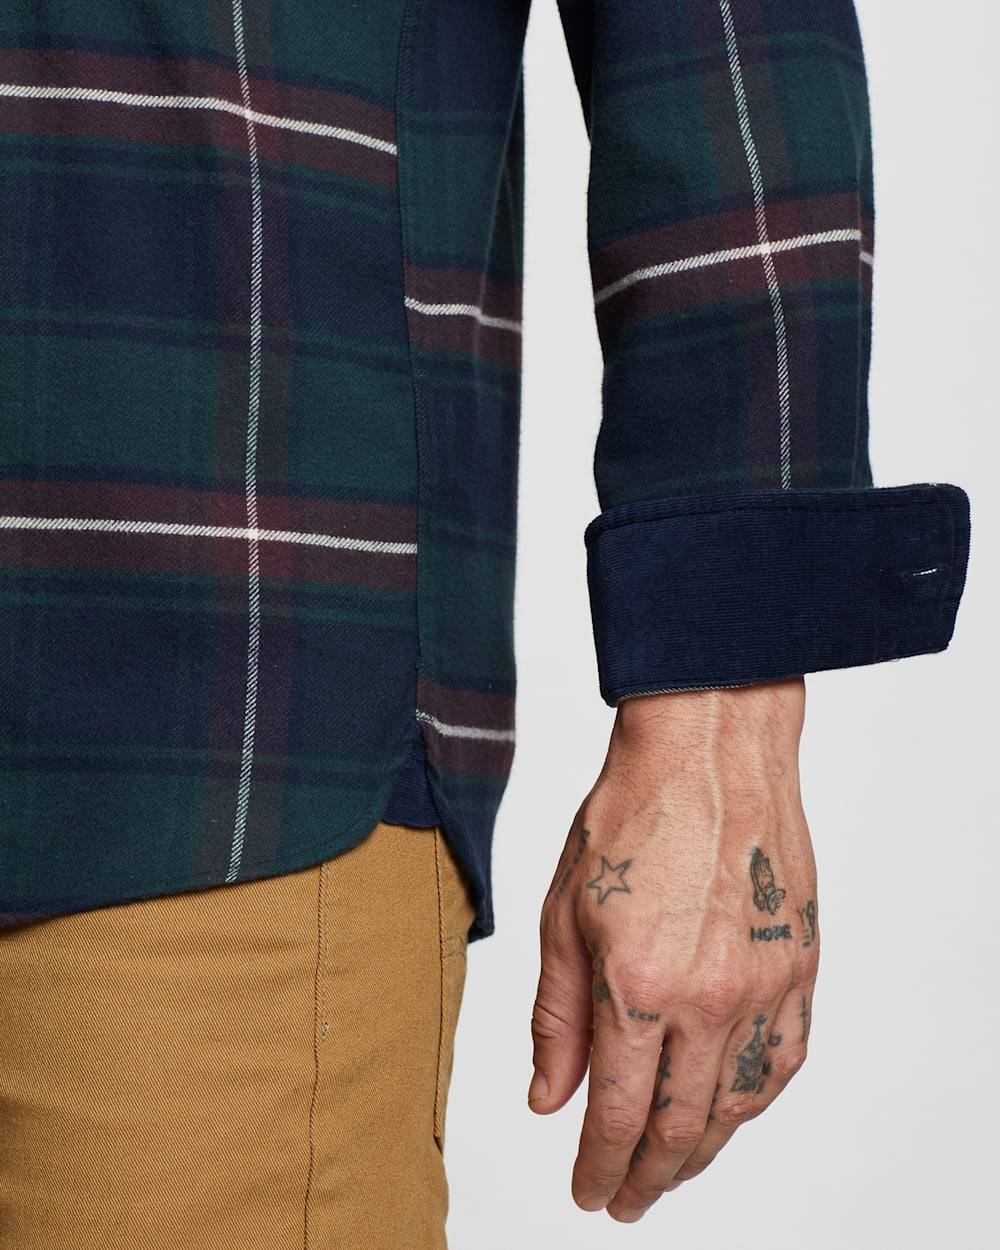 ALTERNATE VIEW OF MEN'S FREMONT DOUBLE-BRUSHED FLANNEL SHIRT IN GREEN/NAVY PLAID image number 4